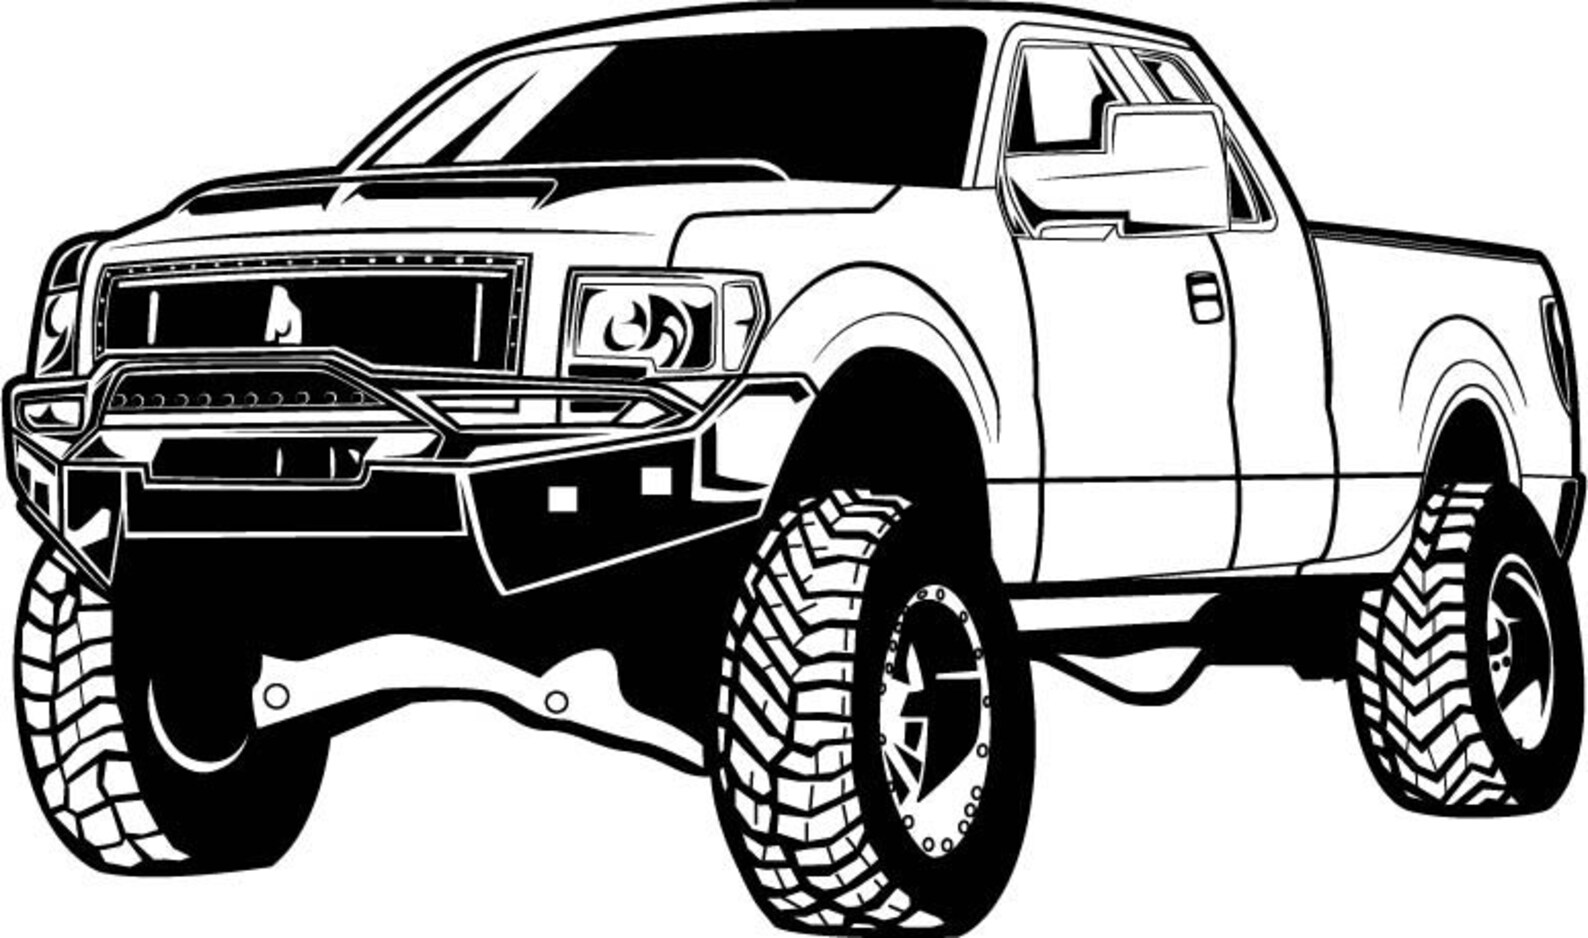 Pickup Truck Offroad 2 Door Lifted Trucks SVG, Clipart, Files for ...